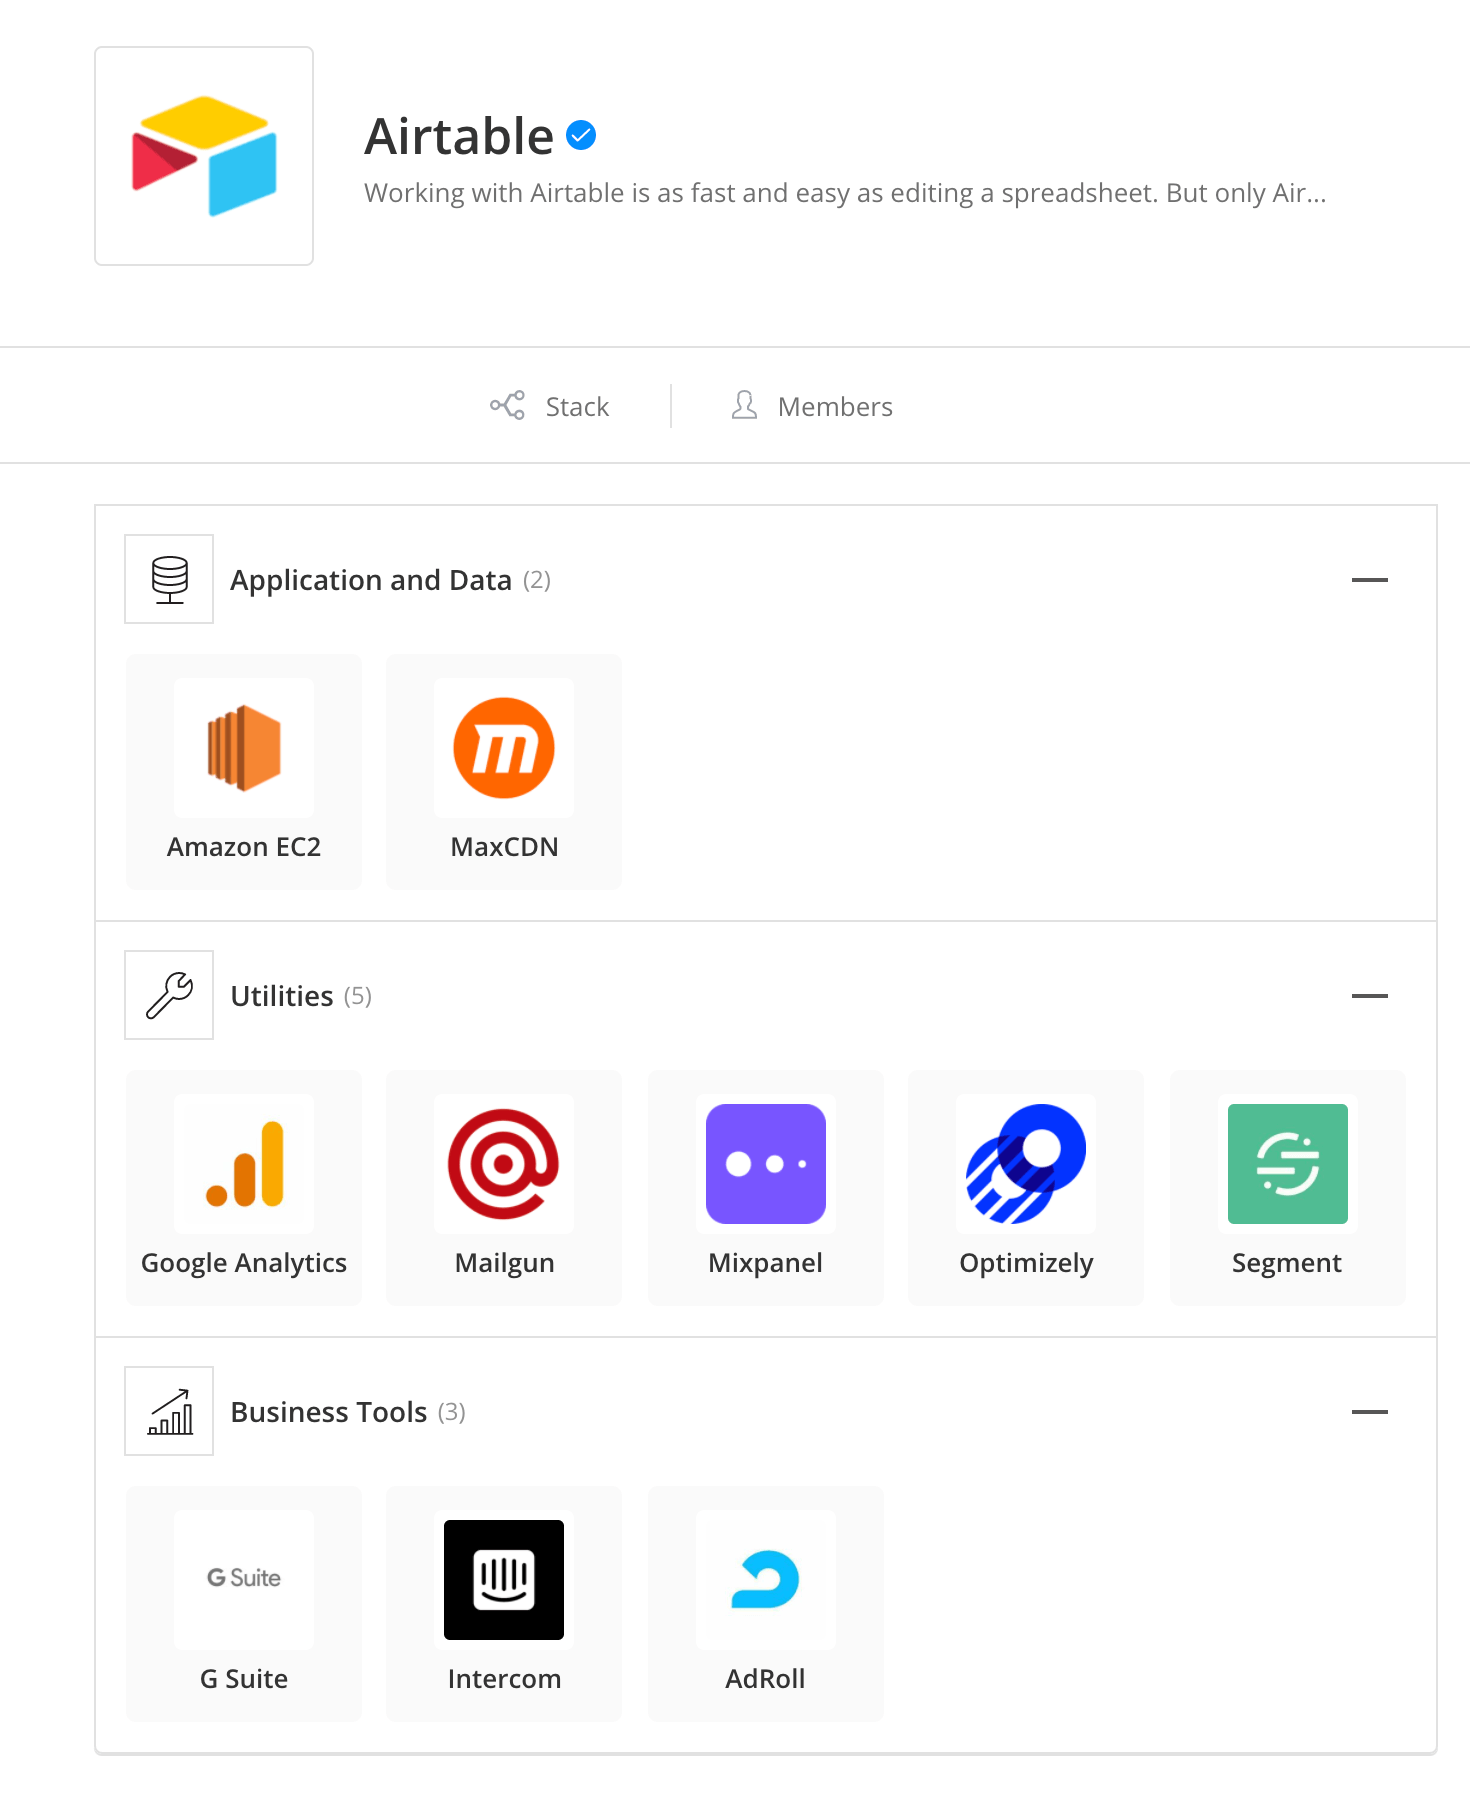 From https://stackshare.io/airtable/airtable